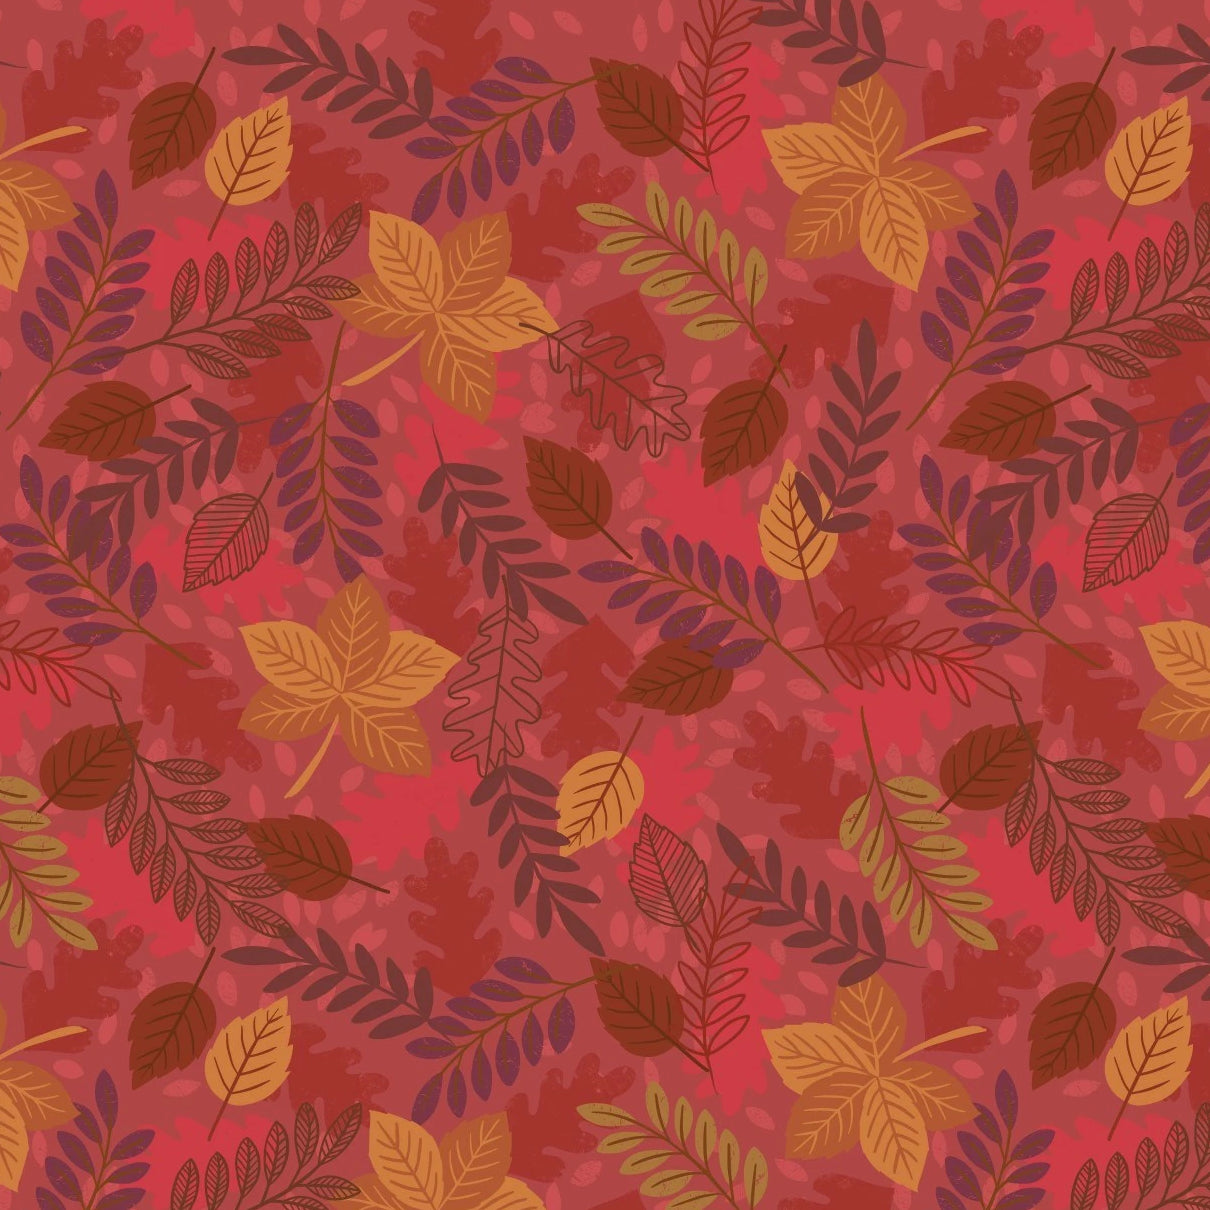 Under the Oak Tree - Leaves Fabric - Trapunto